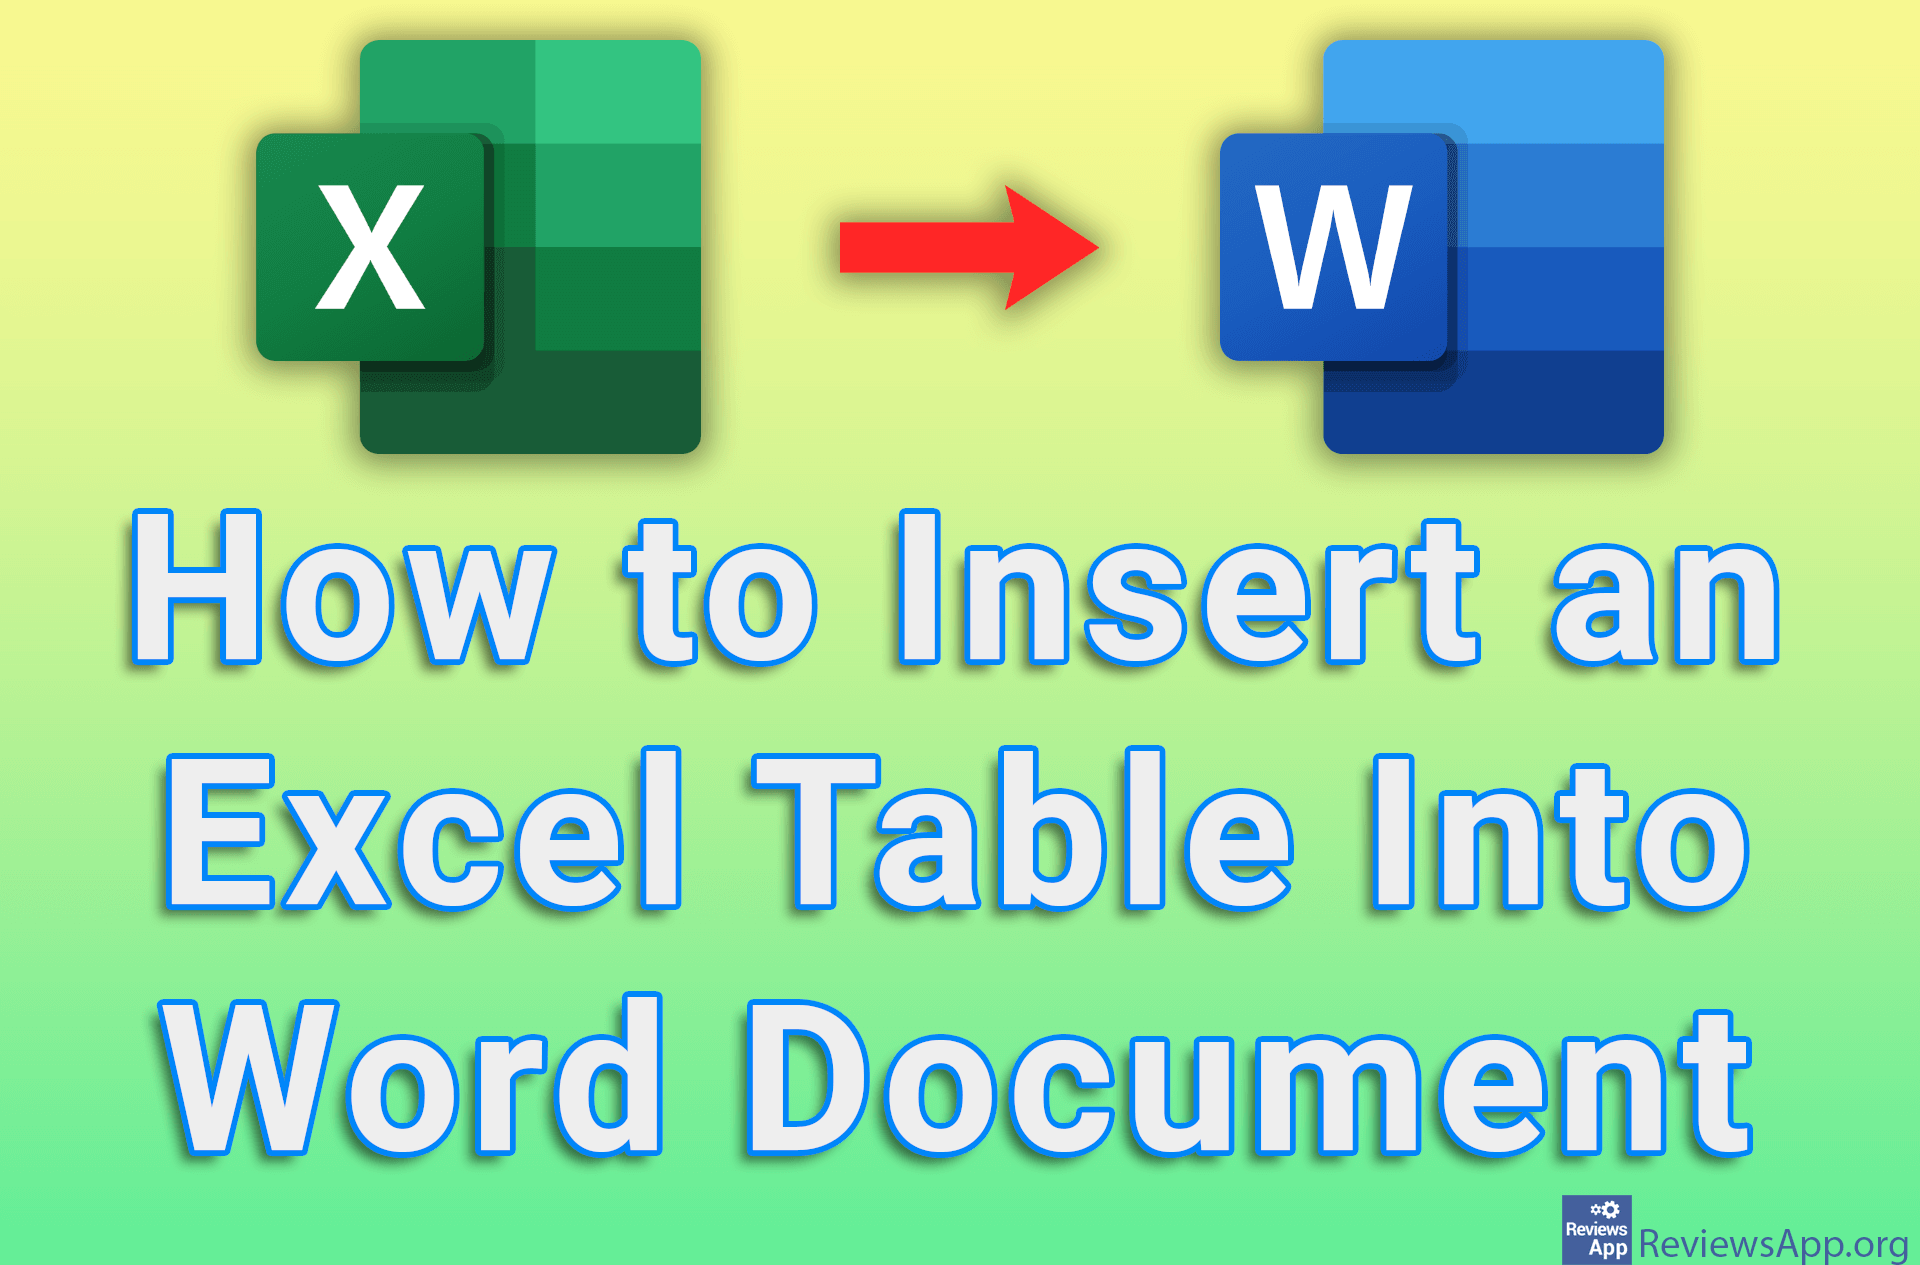 How to Insert an Excel Table Into Word Document